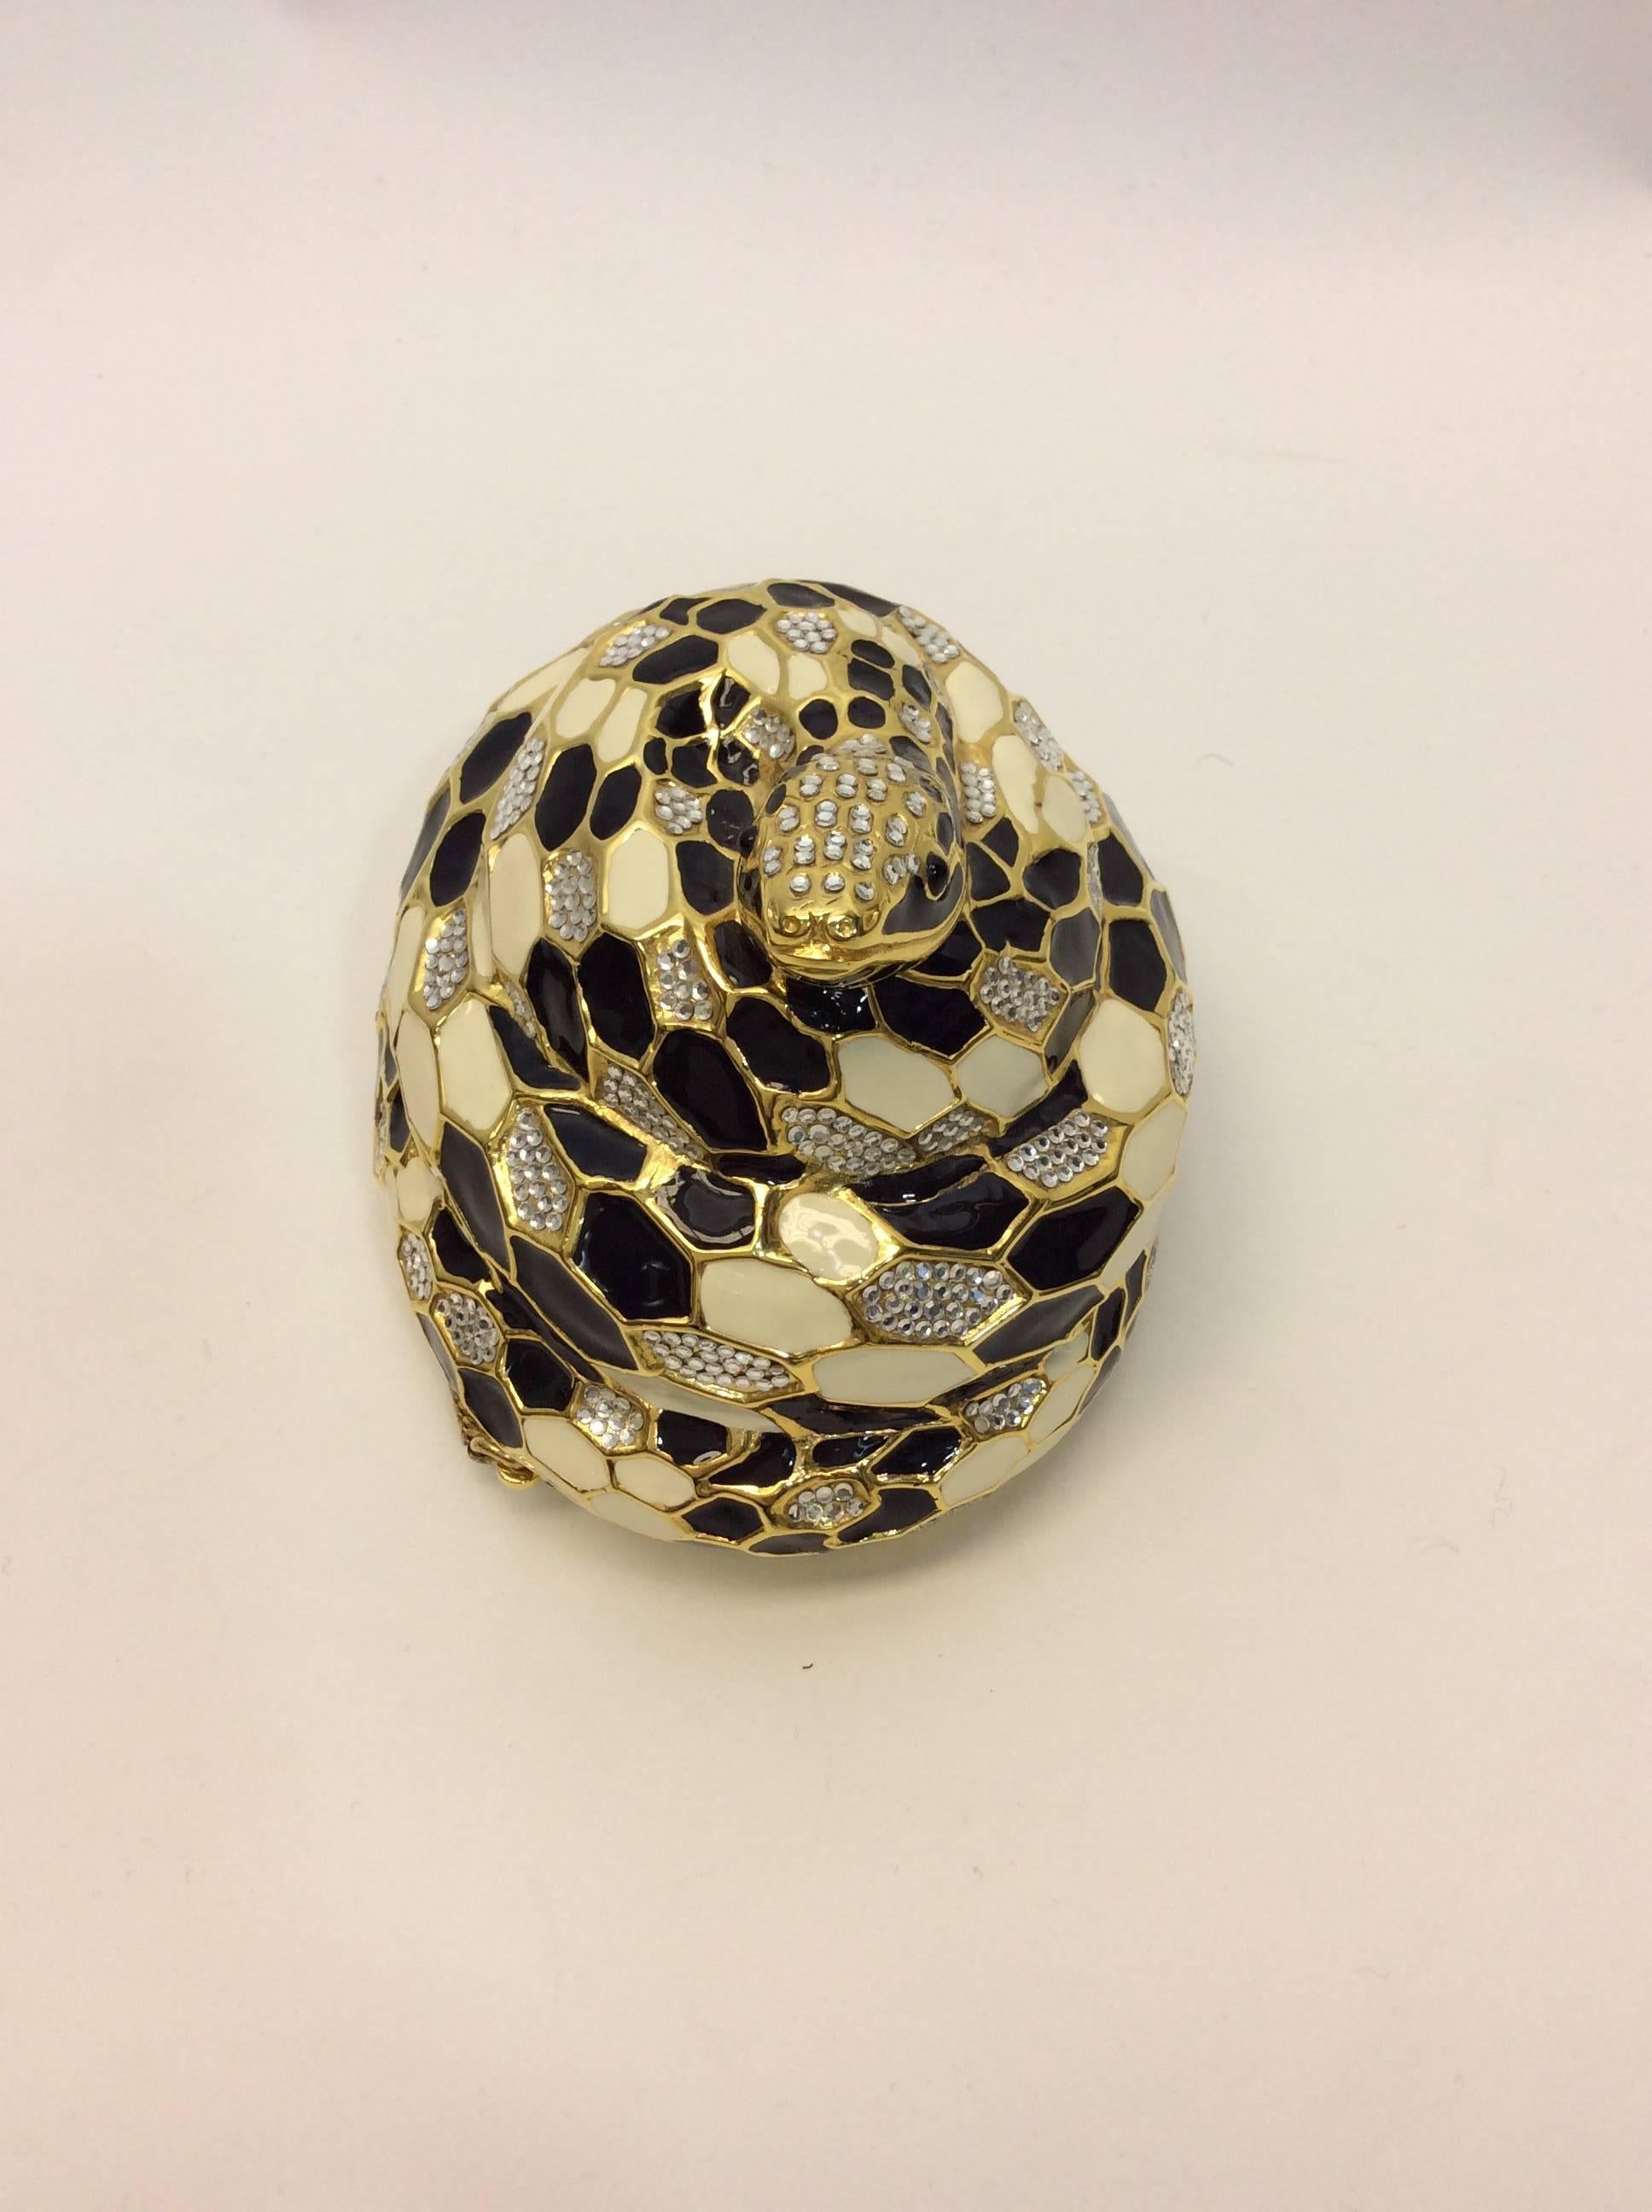 Judith Leiber Snake Minaudiere Crystal Clutch
Judith Leiber Posh Collection - 1989
Network of crystals and enamel on this coiled snake design clutch
Push lock closure
Optional chain
Comes with small leather coin purse, comb and hand mirror
Leather